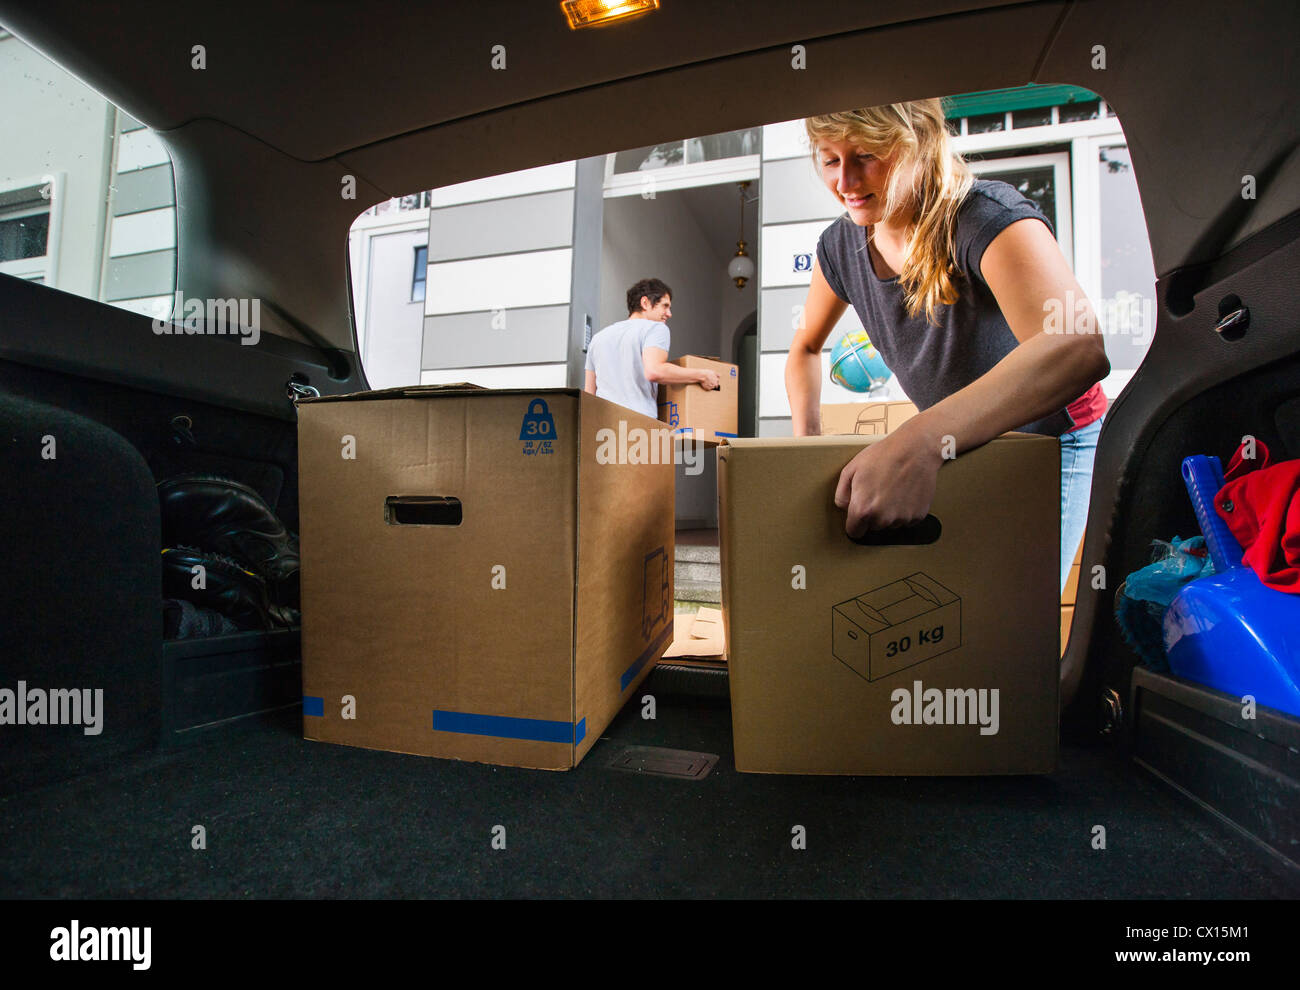 Moving into a new apartment. Friends help carrying moving boxes, furniture, things, from a car into the new house. Stock Photo